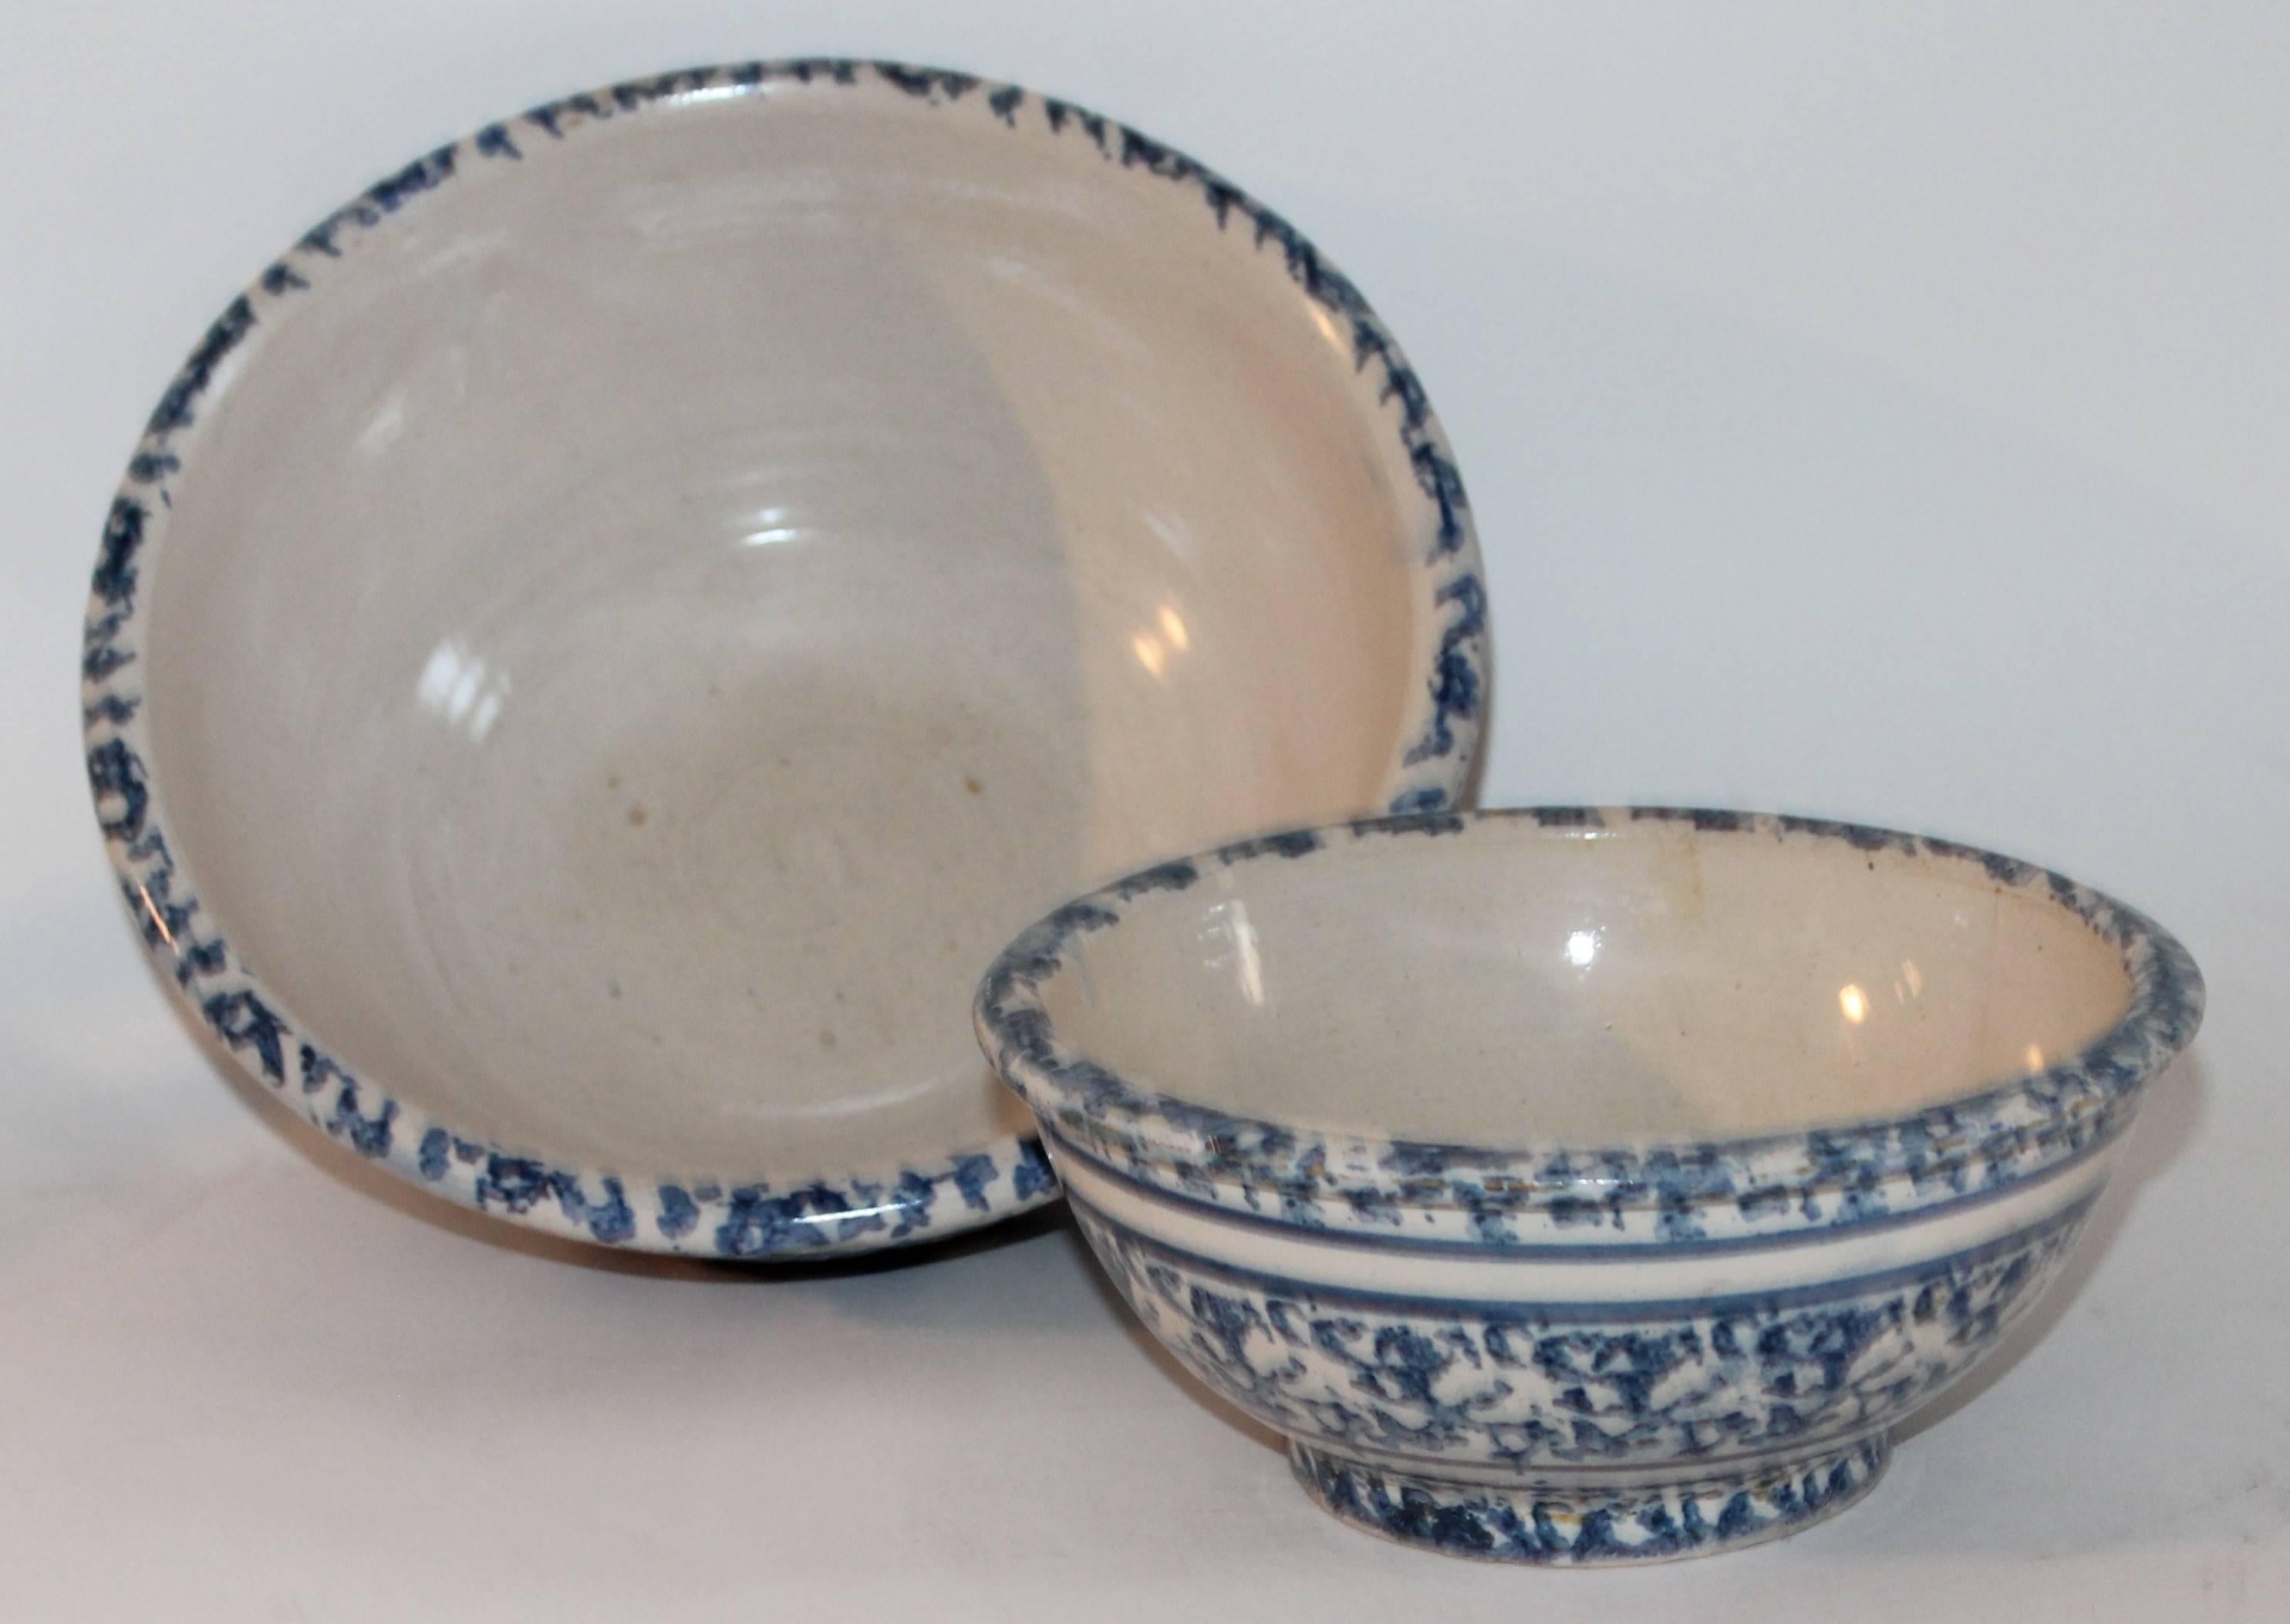 This pair of large and small mixing bowls have double rings around the pattern and are in great condition. It’s very hard to find the matching set. Great on a shelf or in a collection. Measures: The smaller of the bowls is 8 inches in diameter and